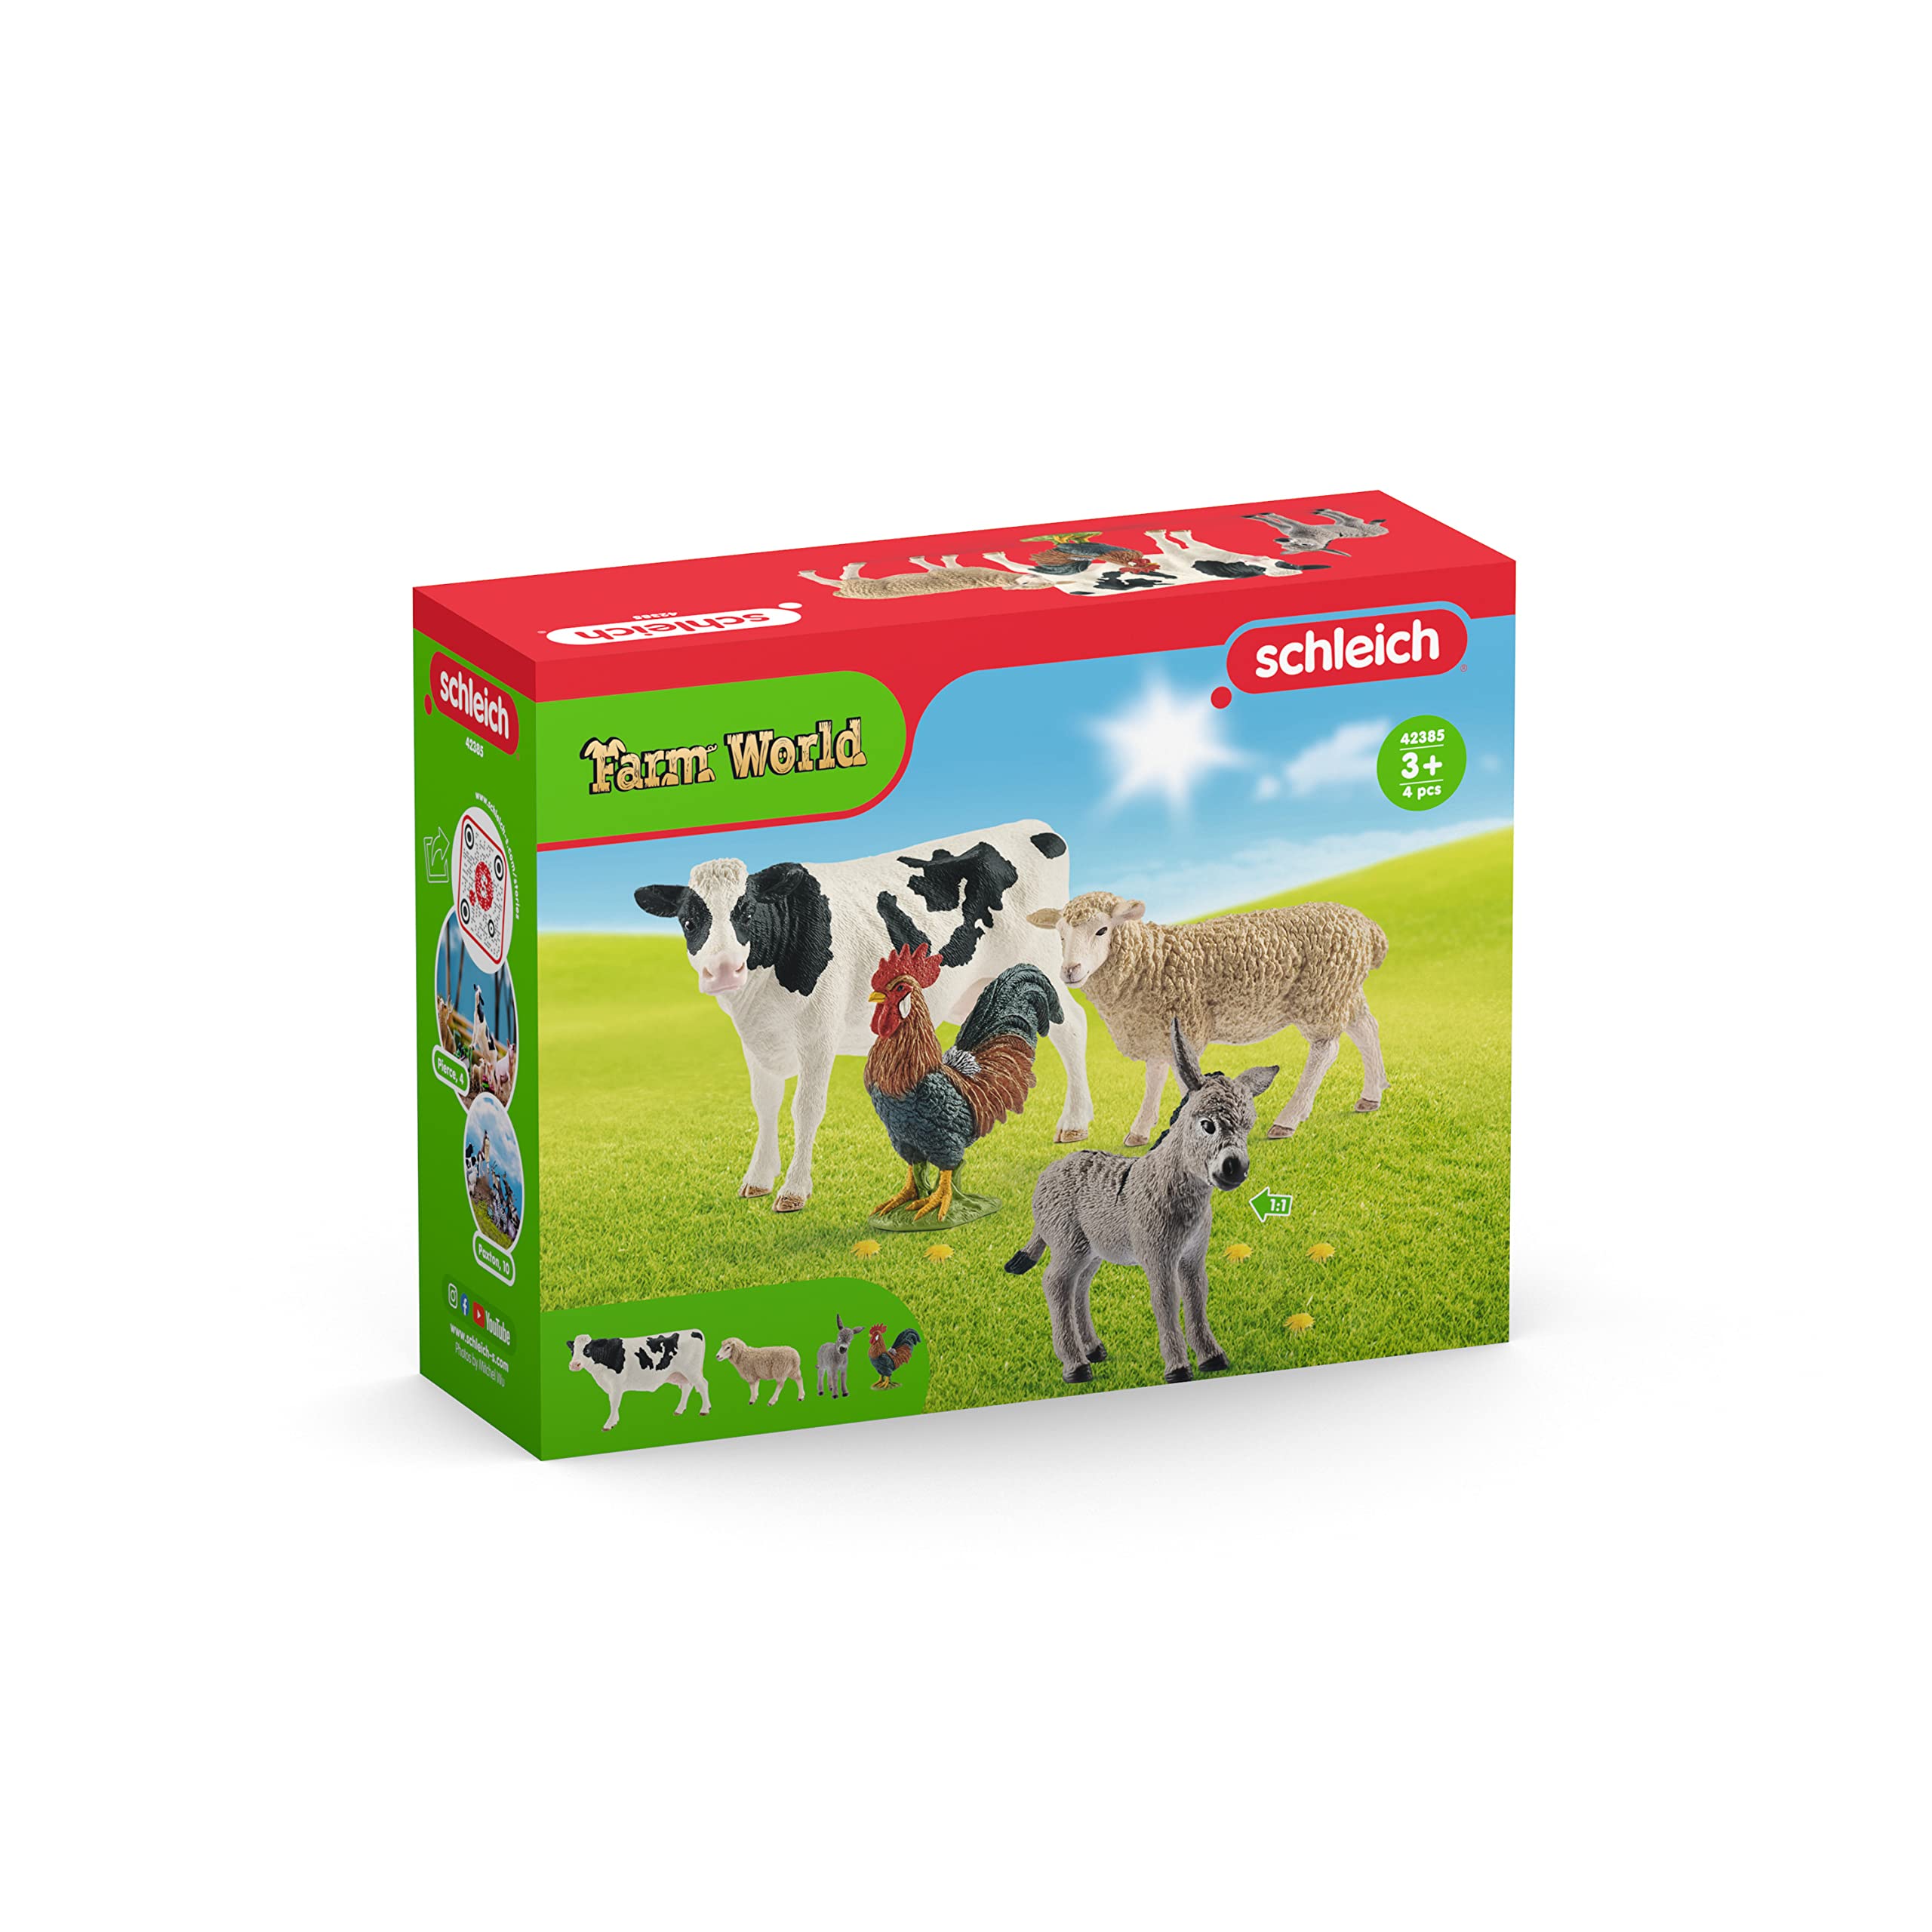 Schleich Farm World - Starter Set, Includes 4 x Collectible Toy Farm Animals, Cow, Sheep, Donkey Foal and Rooster Farm Animal Toys for Kids Ages 3+